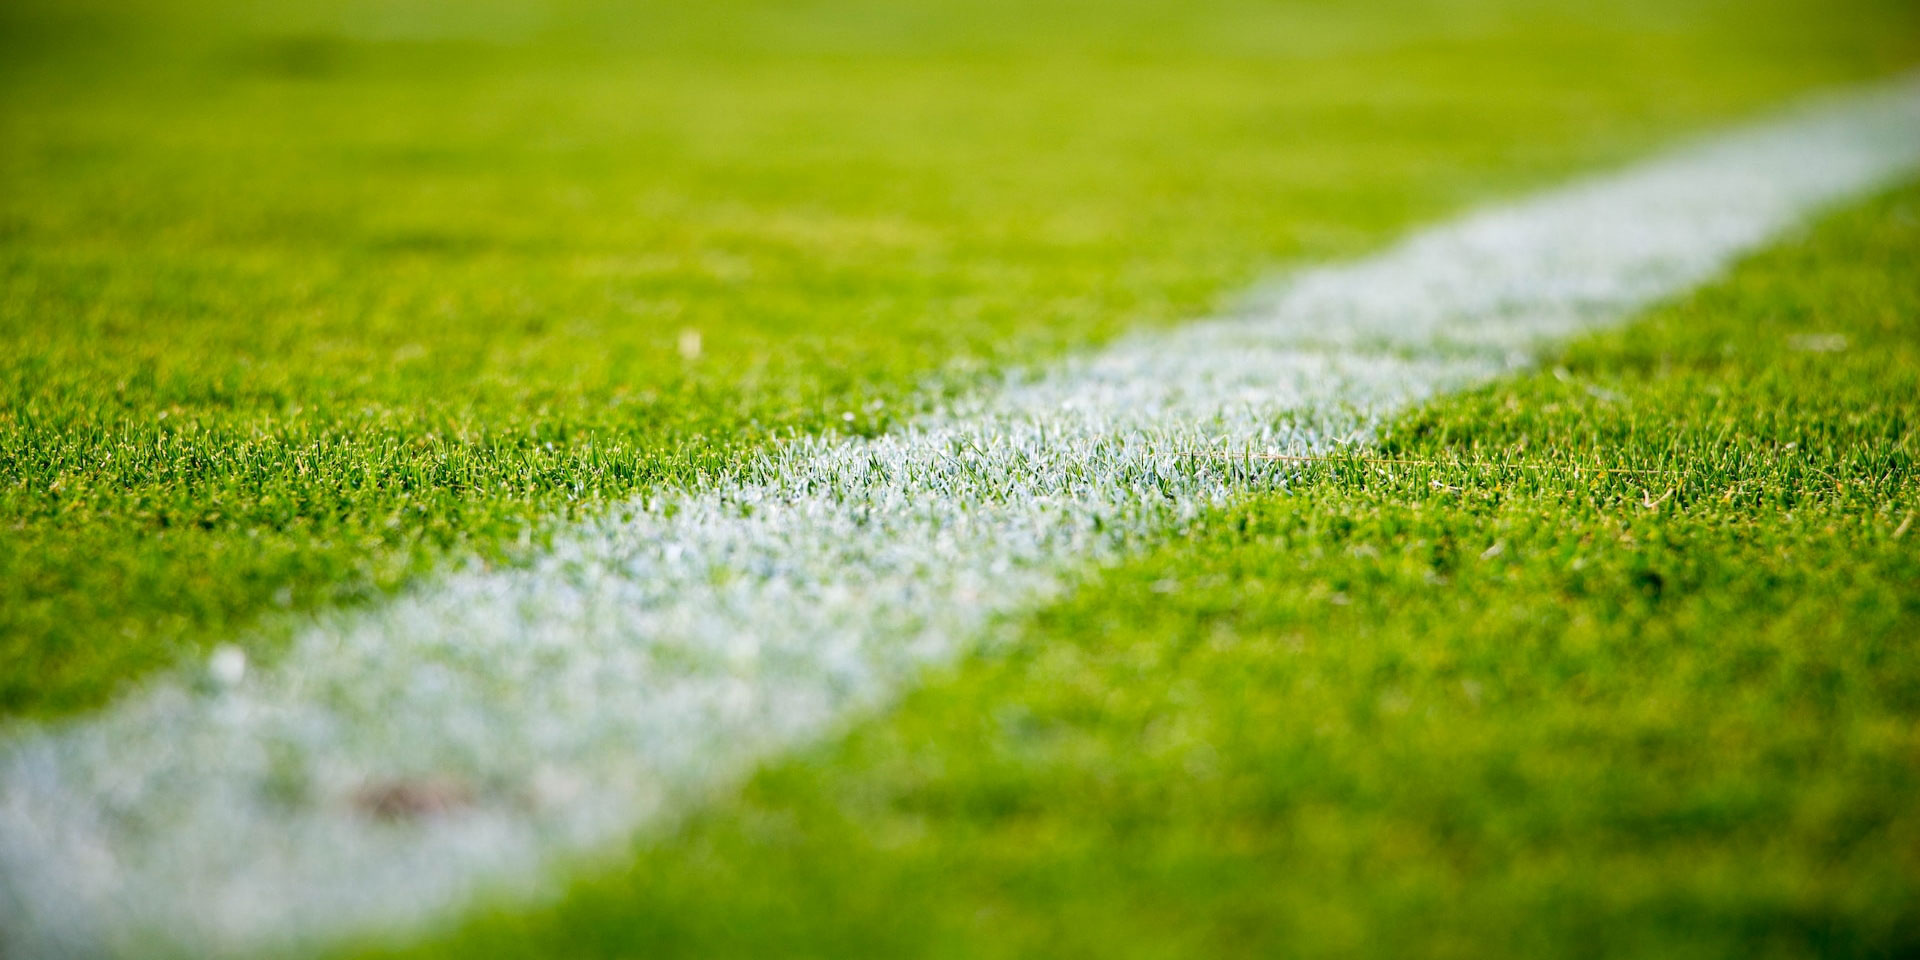 Close-up of a white line drawn on the grass of a football field. 